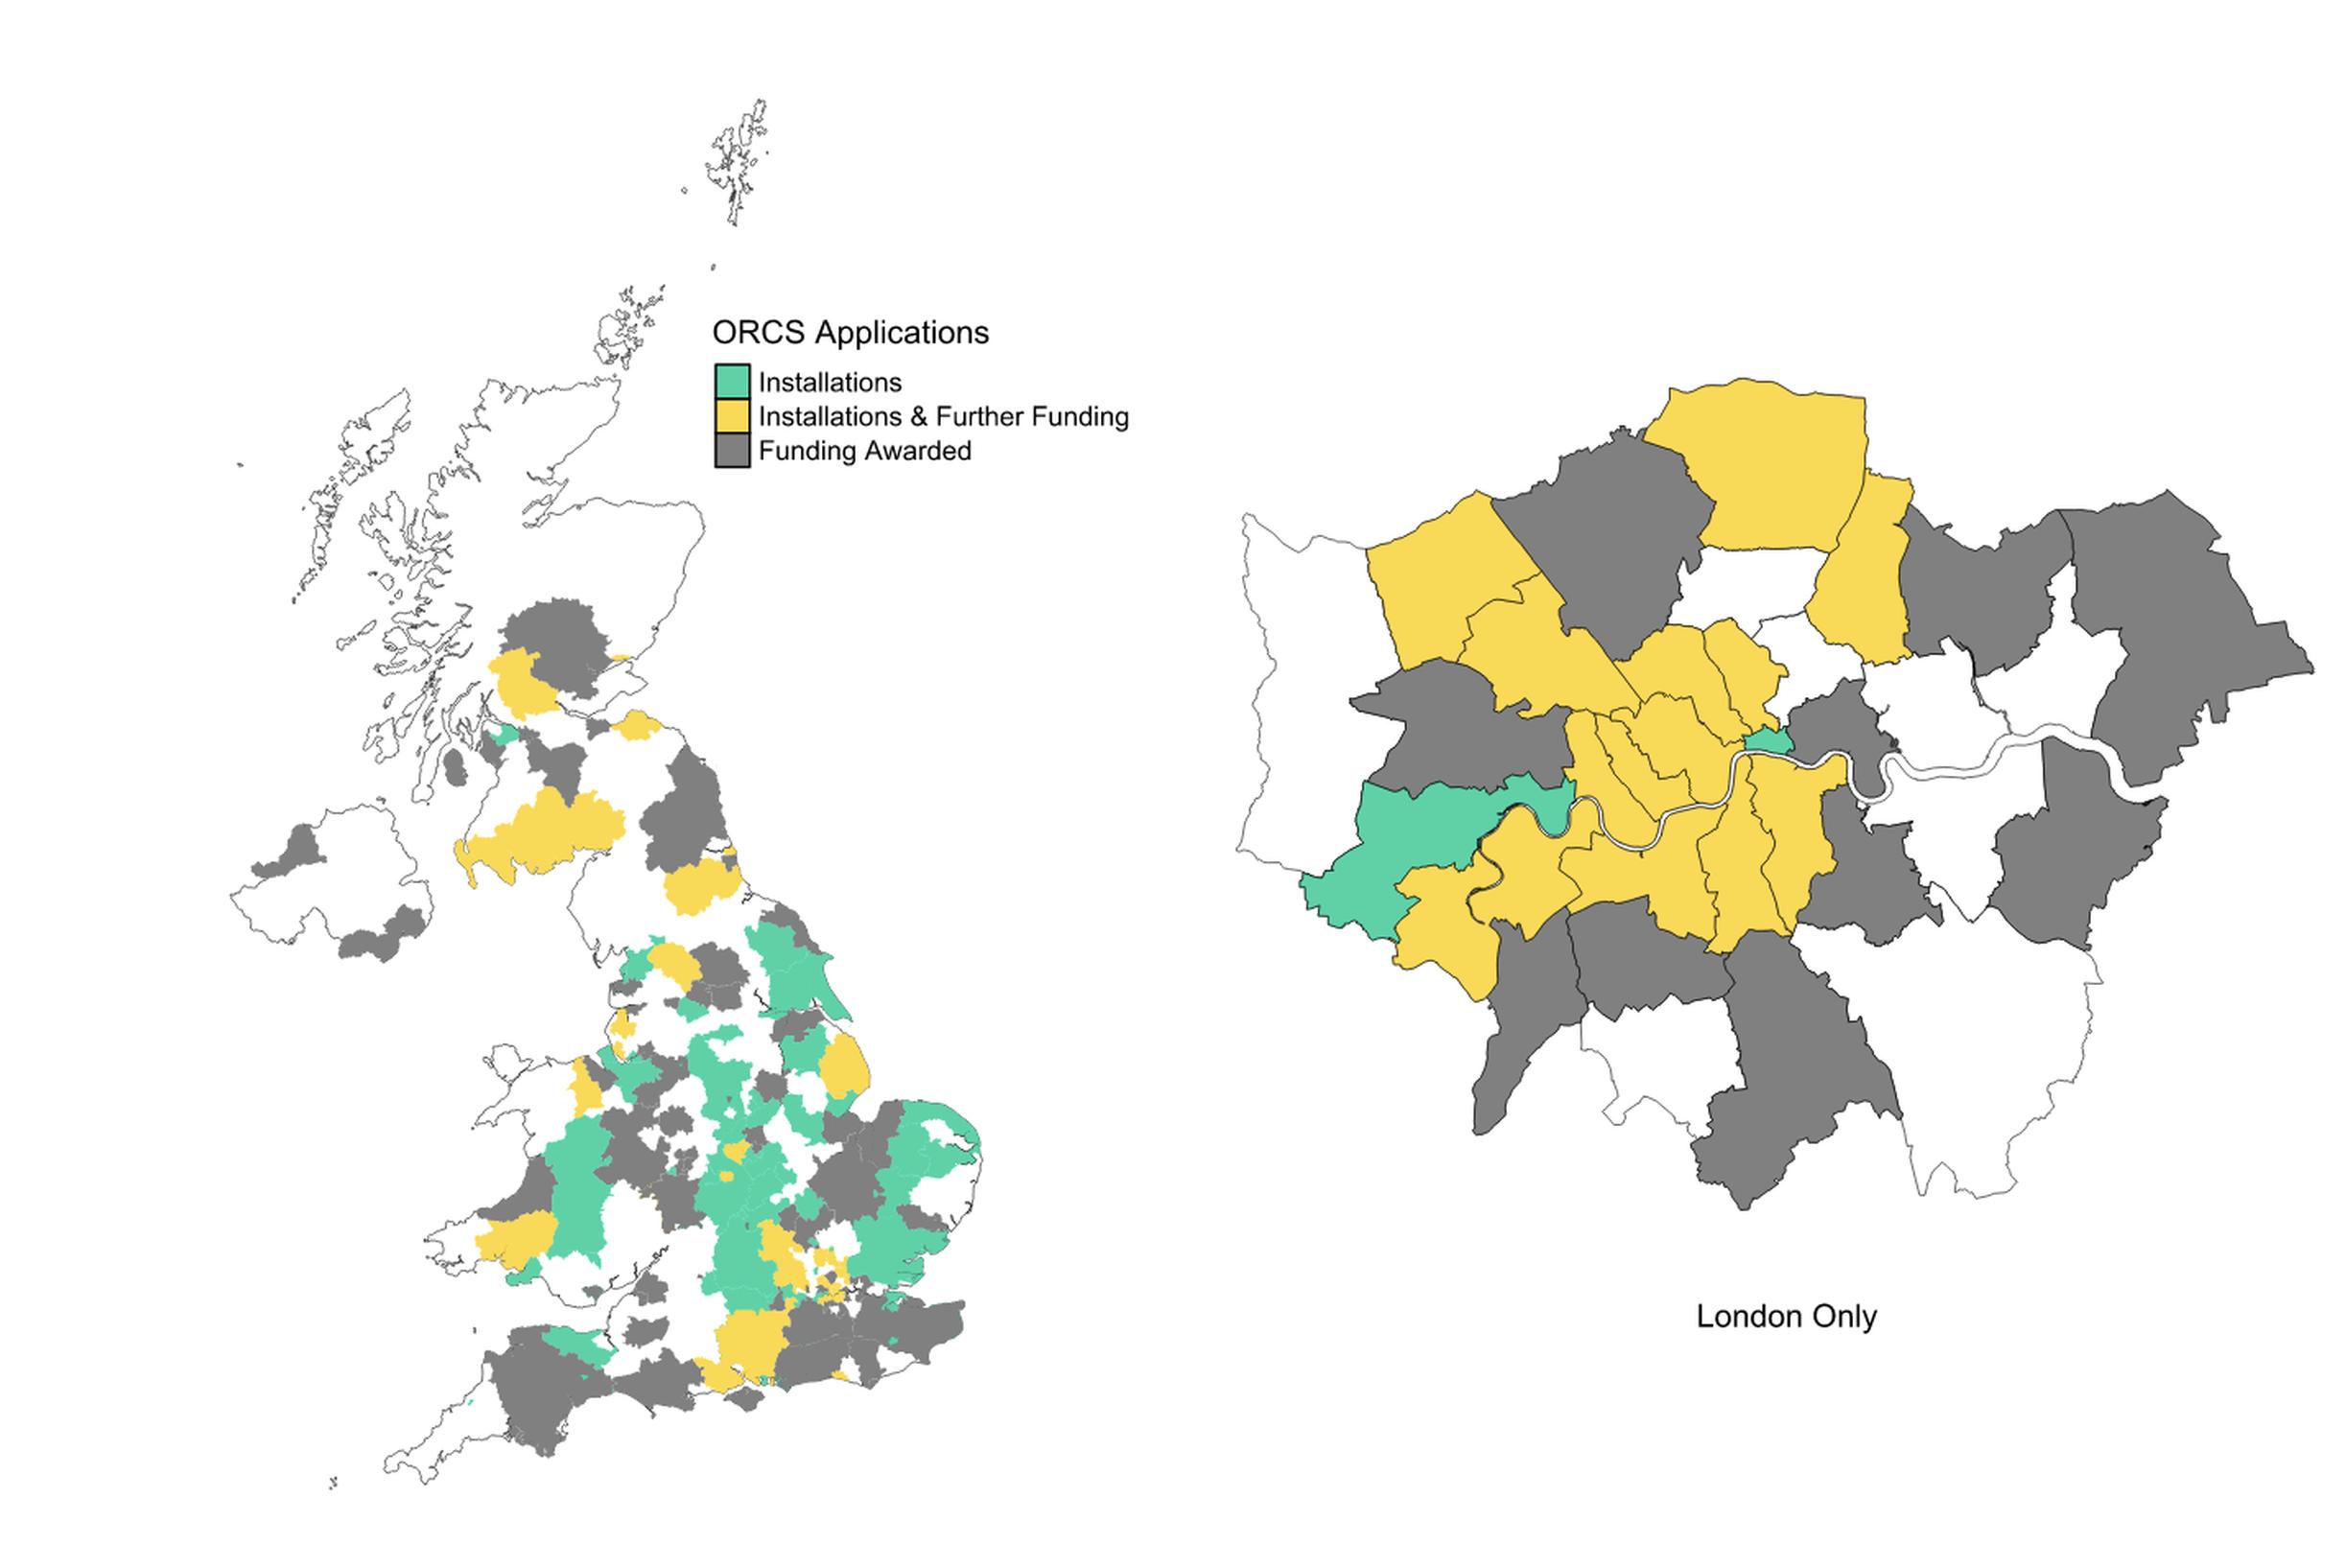 Distribution of local authorities which have been awarded ORCS funding for the UK and London